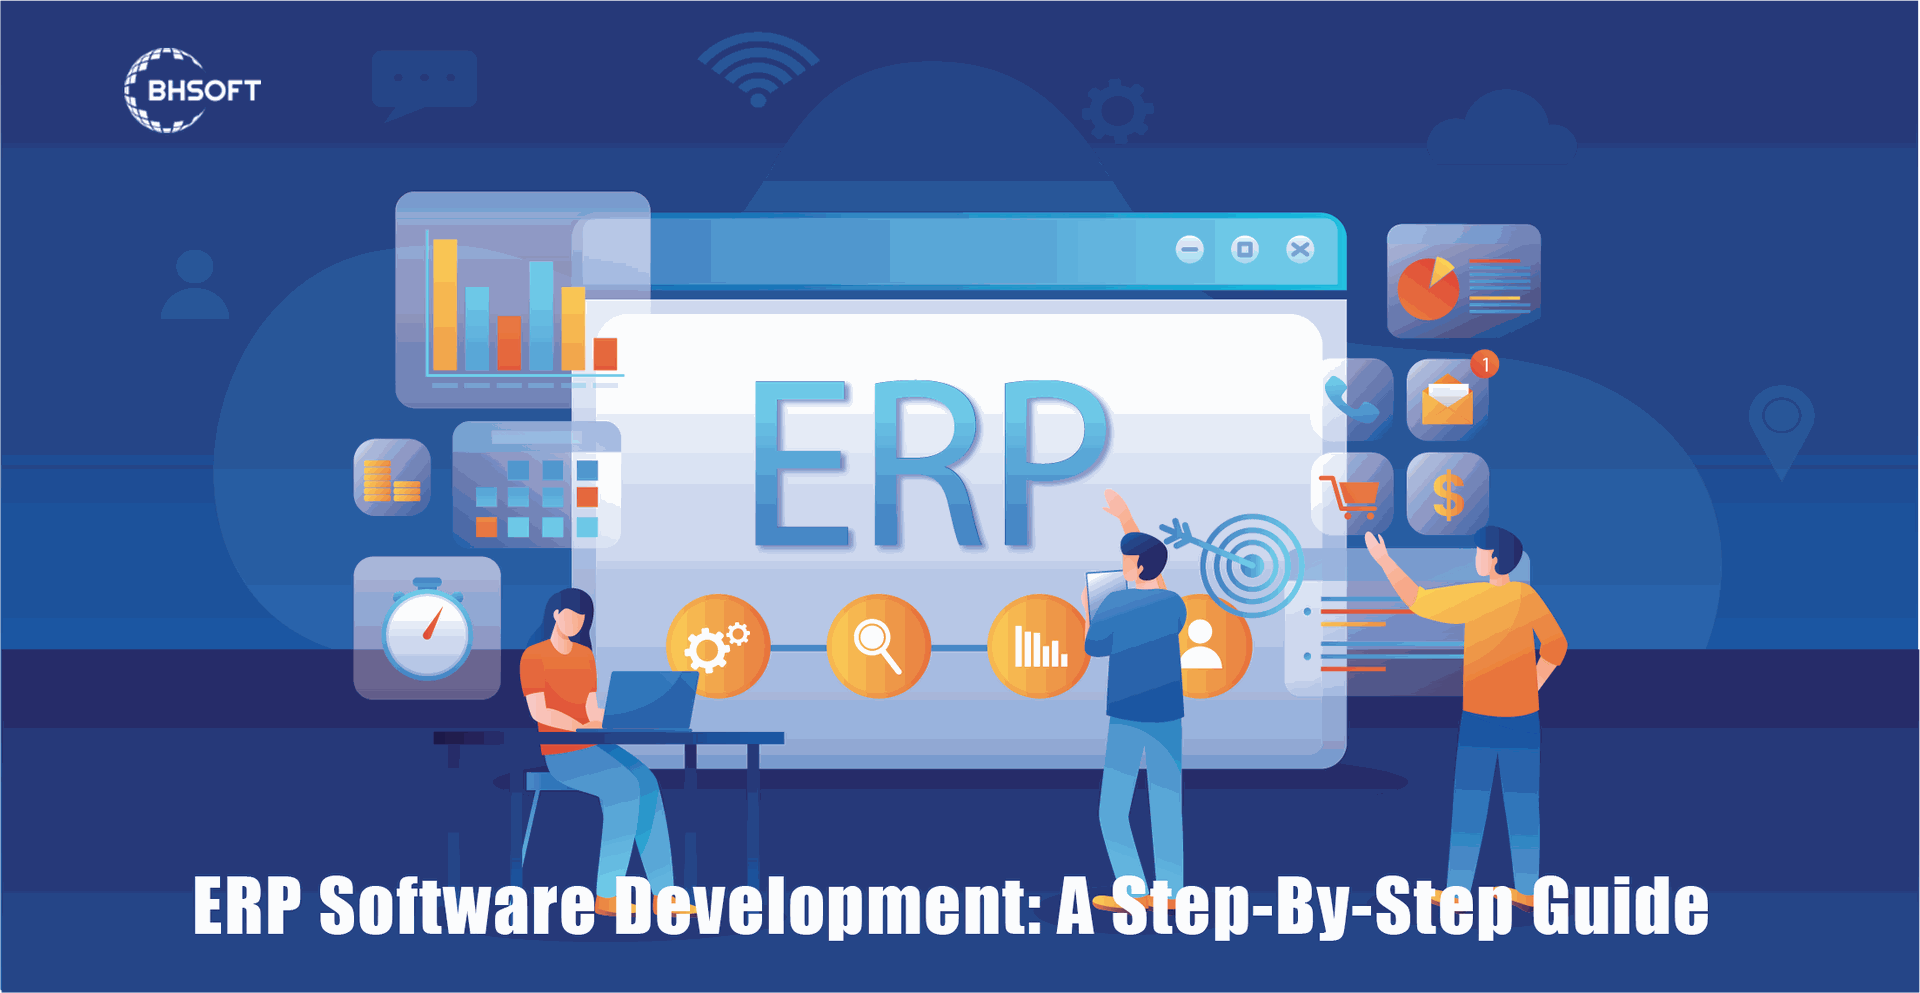 ERP Software Development: A Step-By-Step Guide